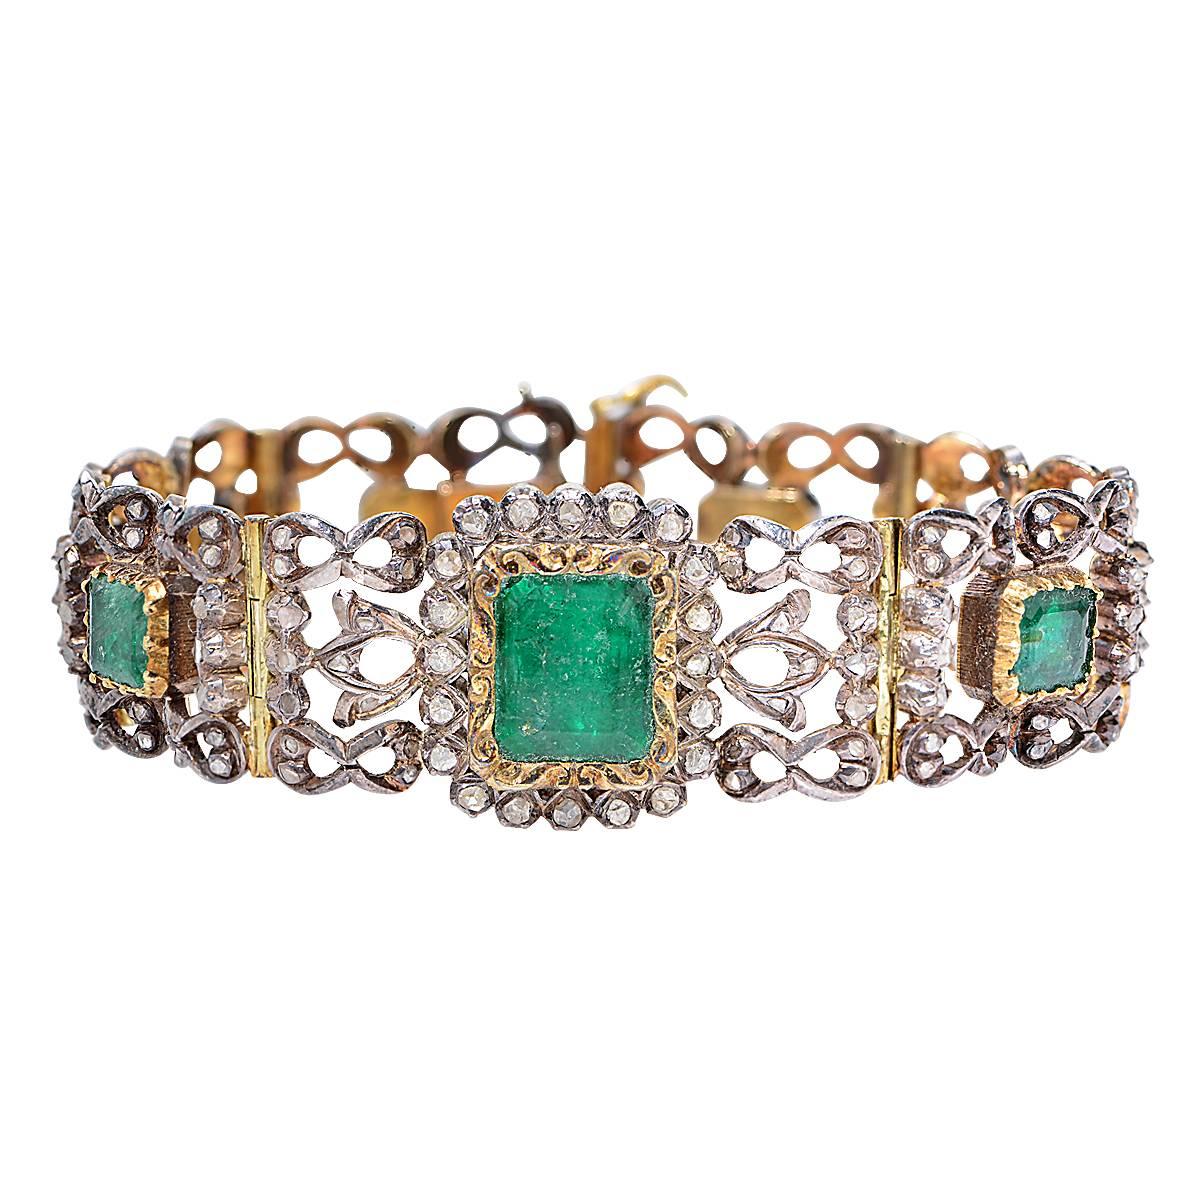 Victorian Bracelet Containing 7 Emerald Cut Emeralds Approximately 28 Carats and 169 Diamonds Approximately 1.50 Carats - Silver Over 18 Karat Yellow Gold - French Hallmarks. Length is 7.75